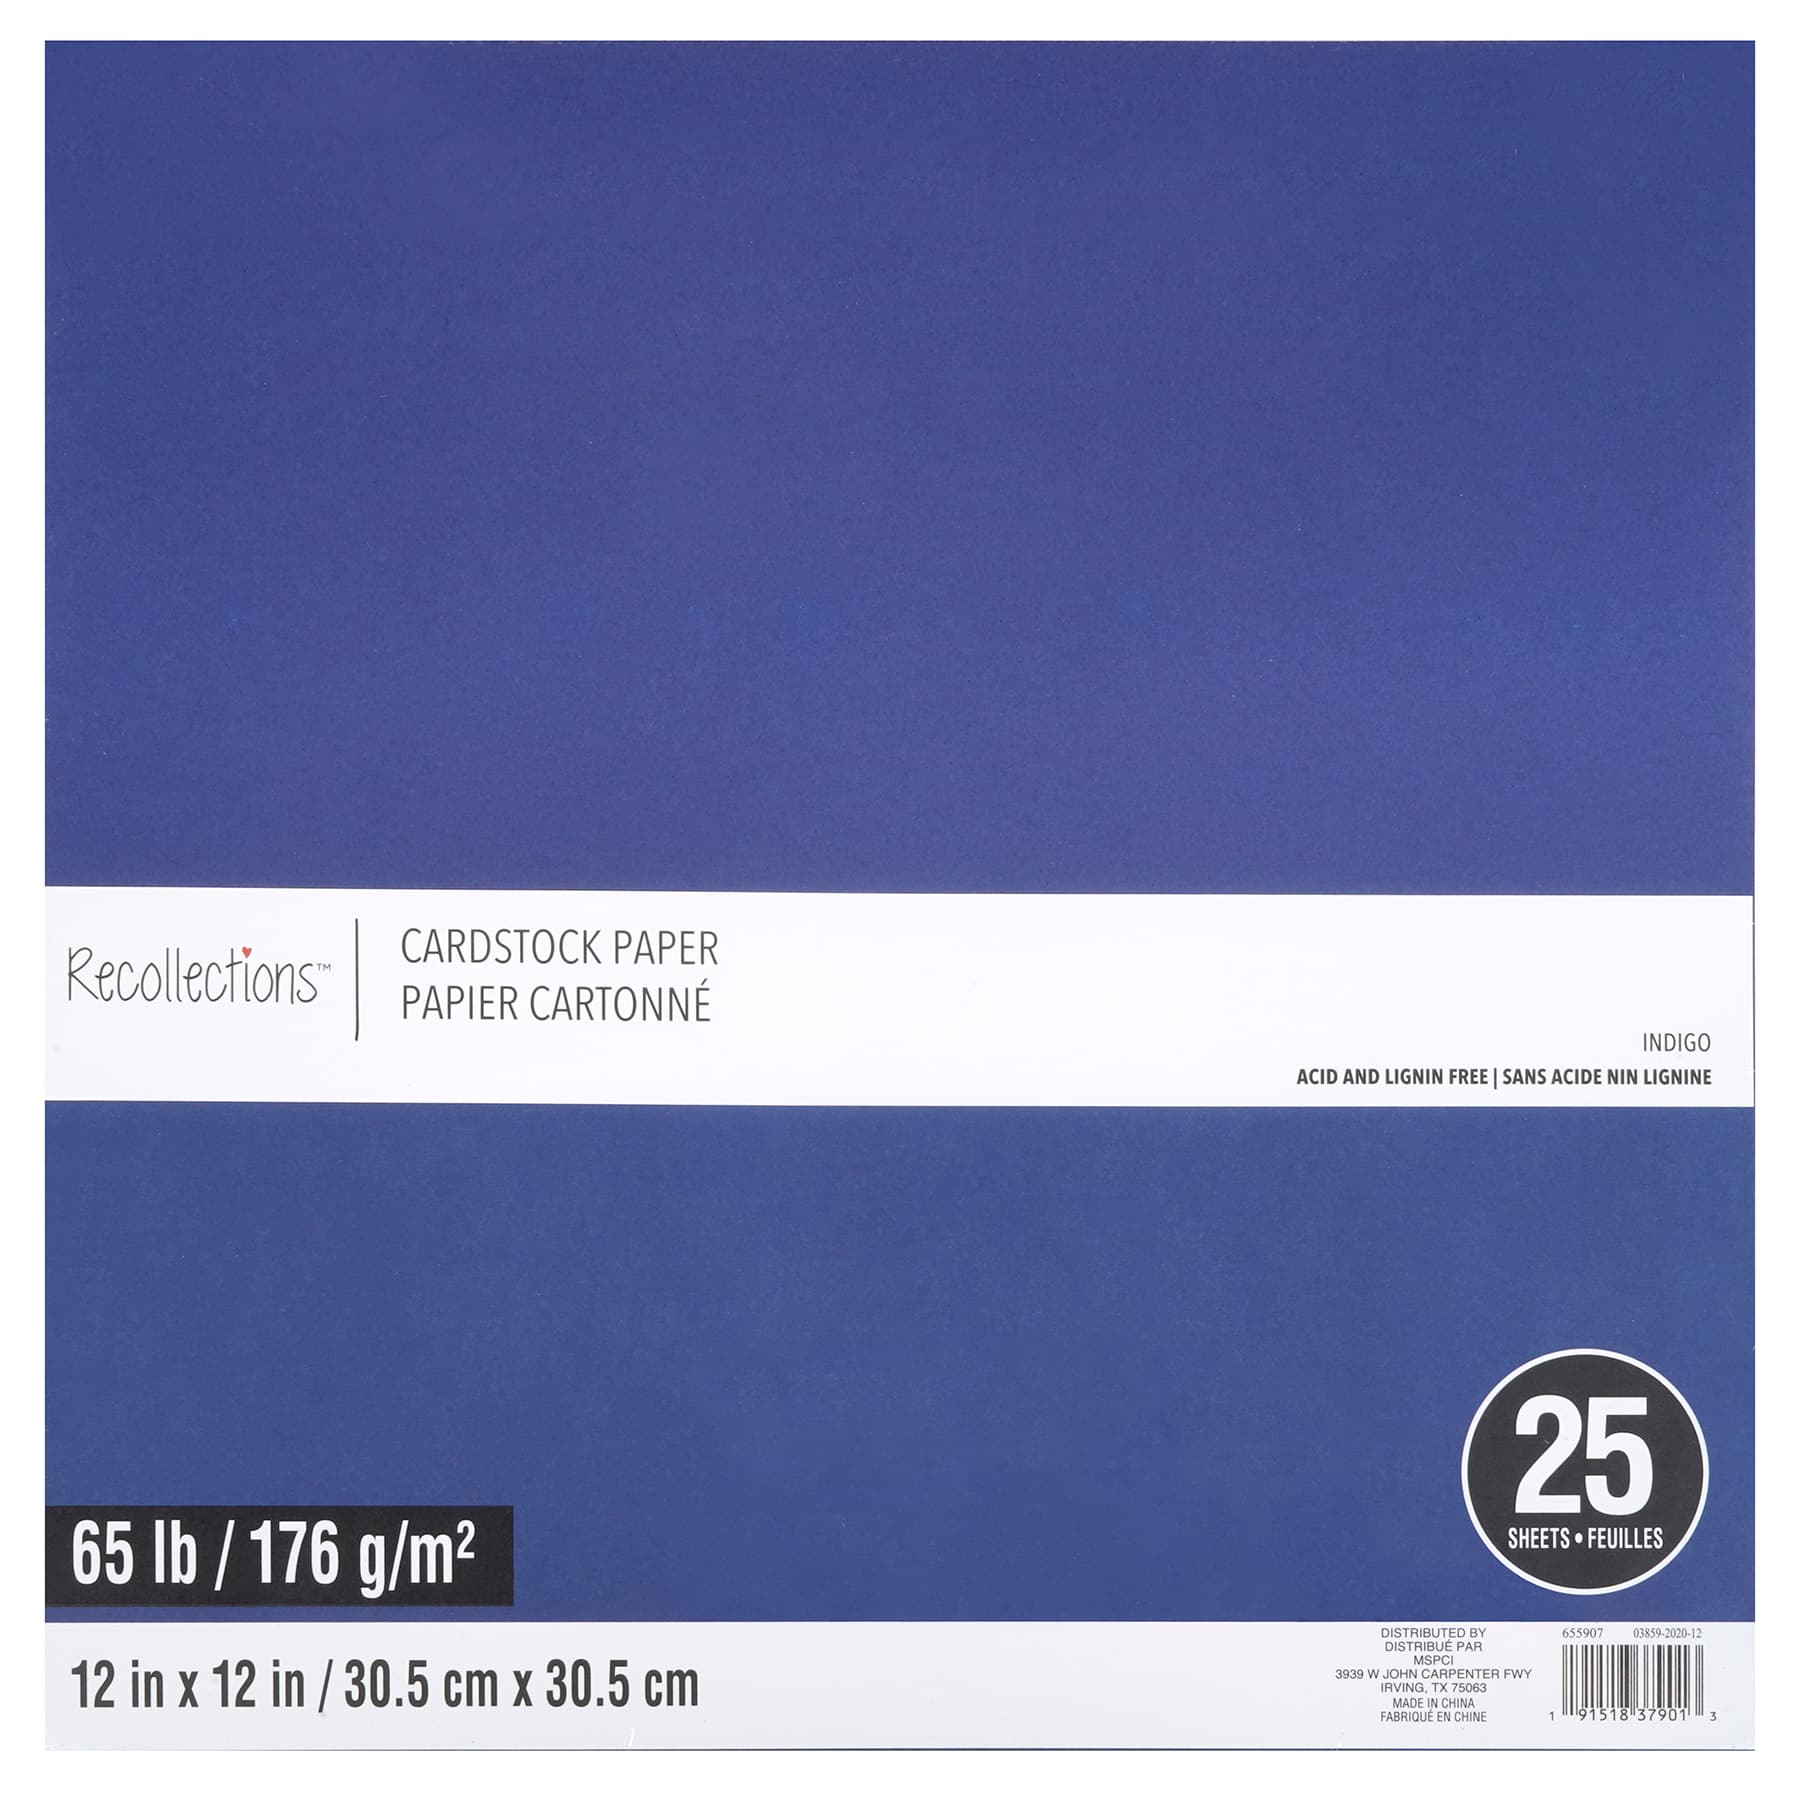 Blue Light Cardstock - Cover Weight Paper - Glo-Tone – French Paper